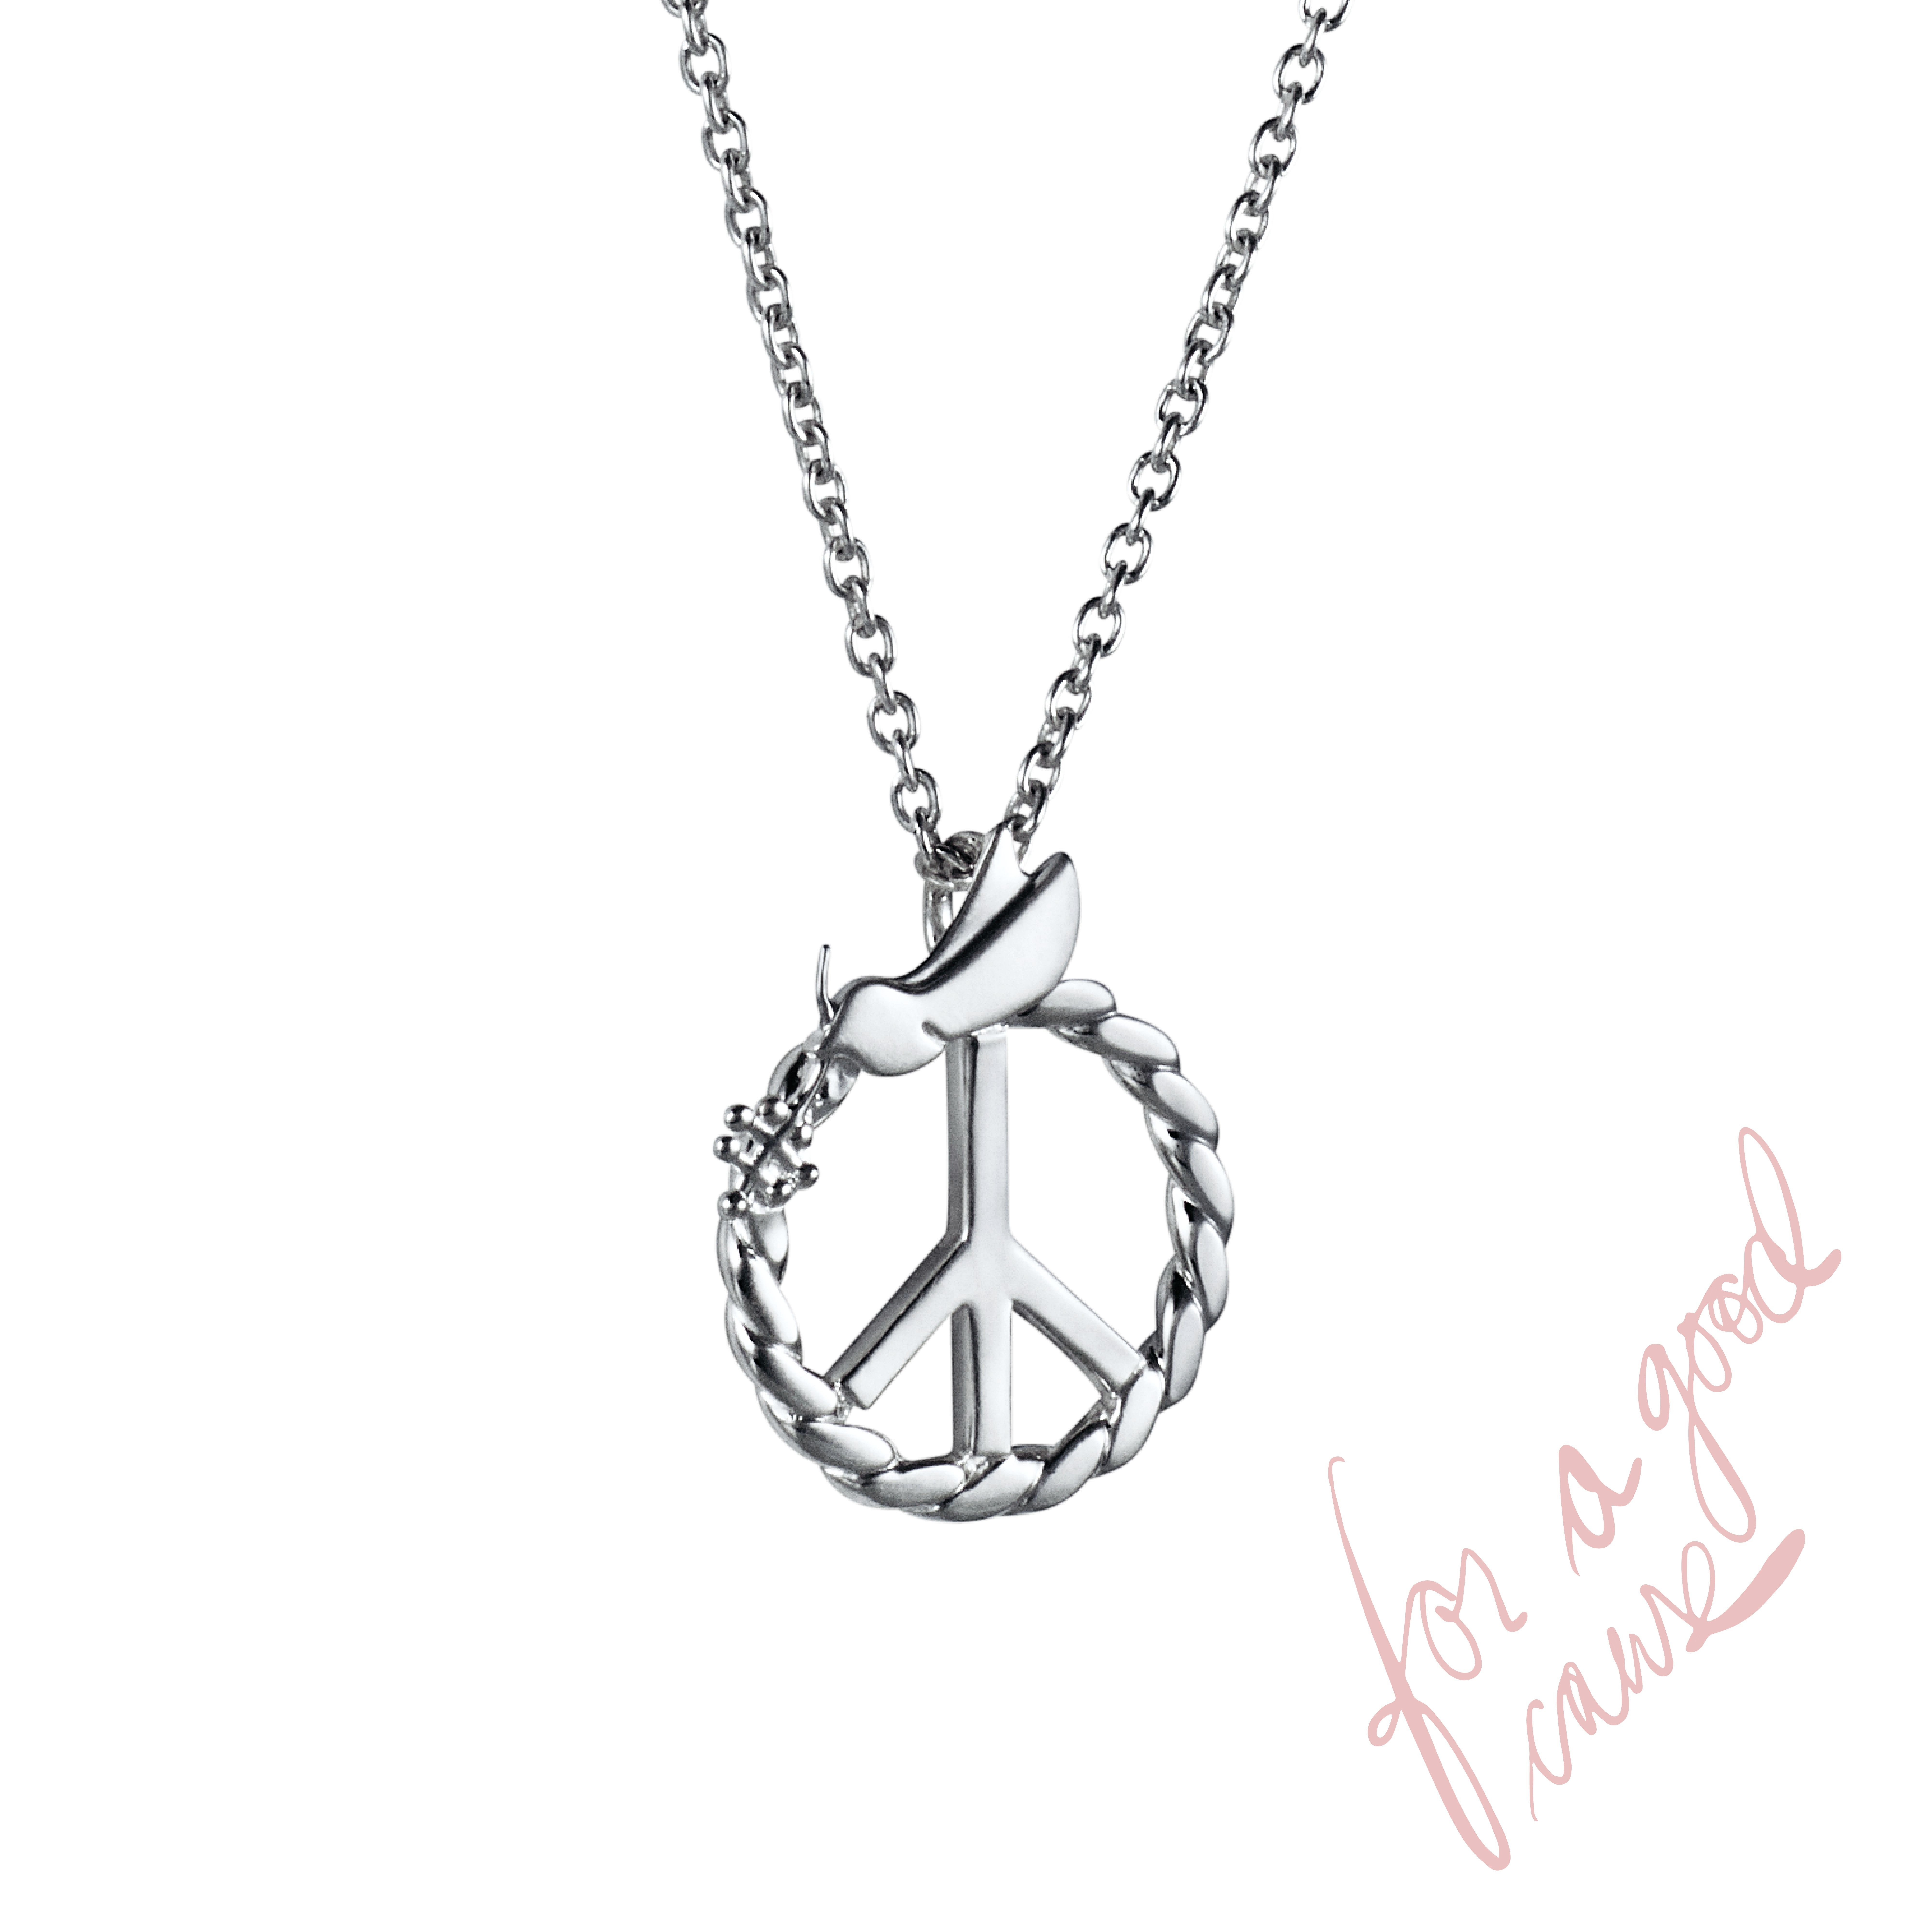 Efva Attling Thoughts of Freedom Pendant 50 CM - SILVER